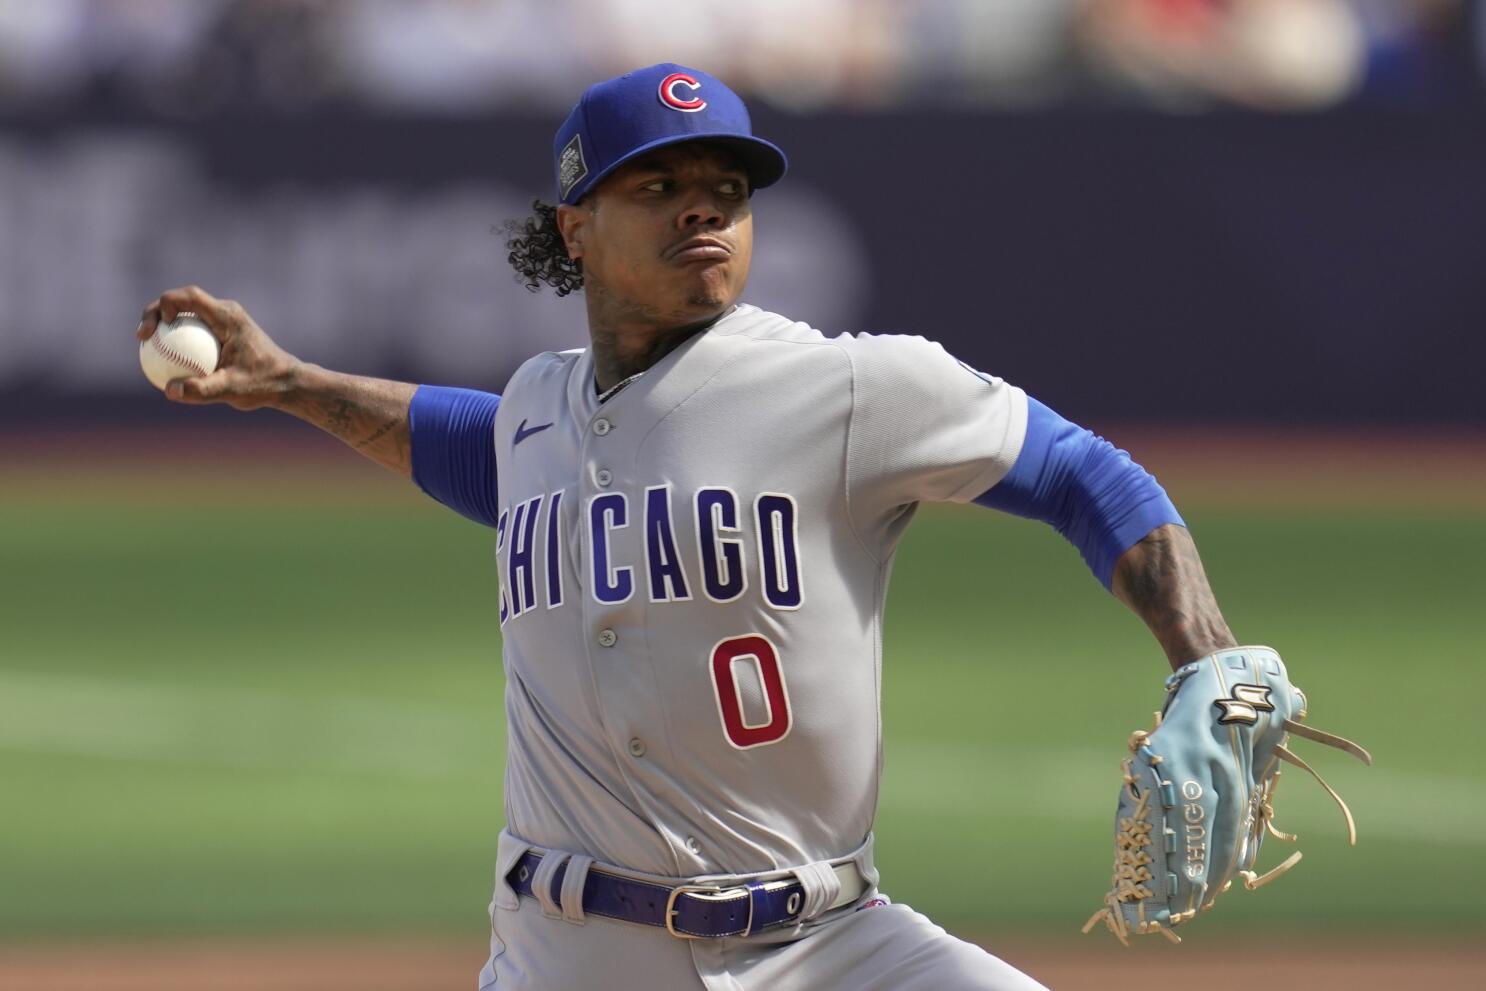 Marcus Stroman Walking Off Mound At Wrigley Field - Marquee Sports Network